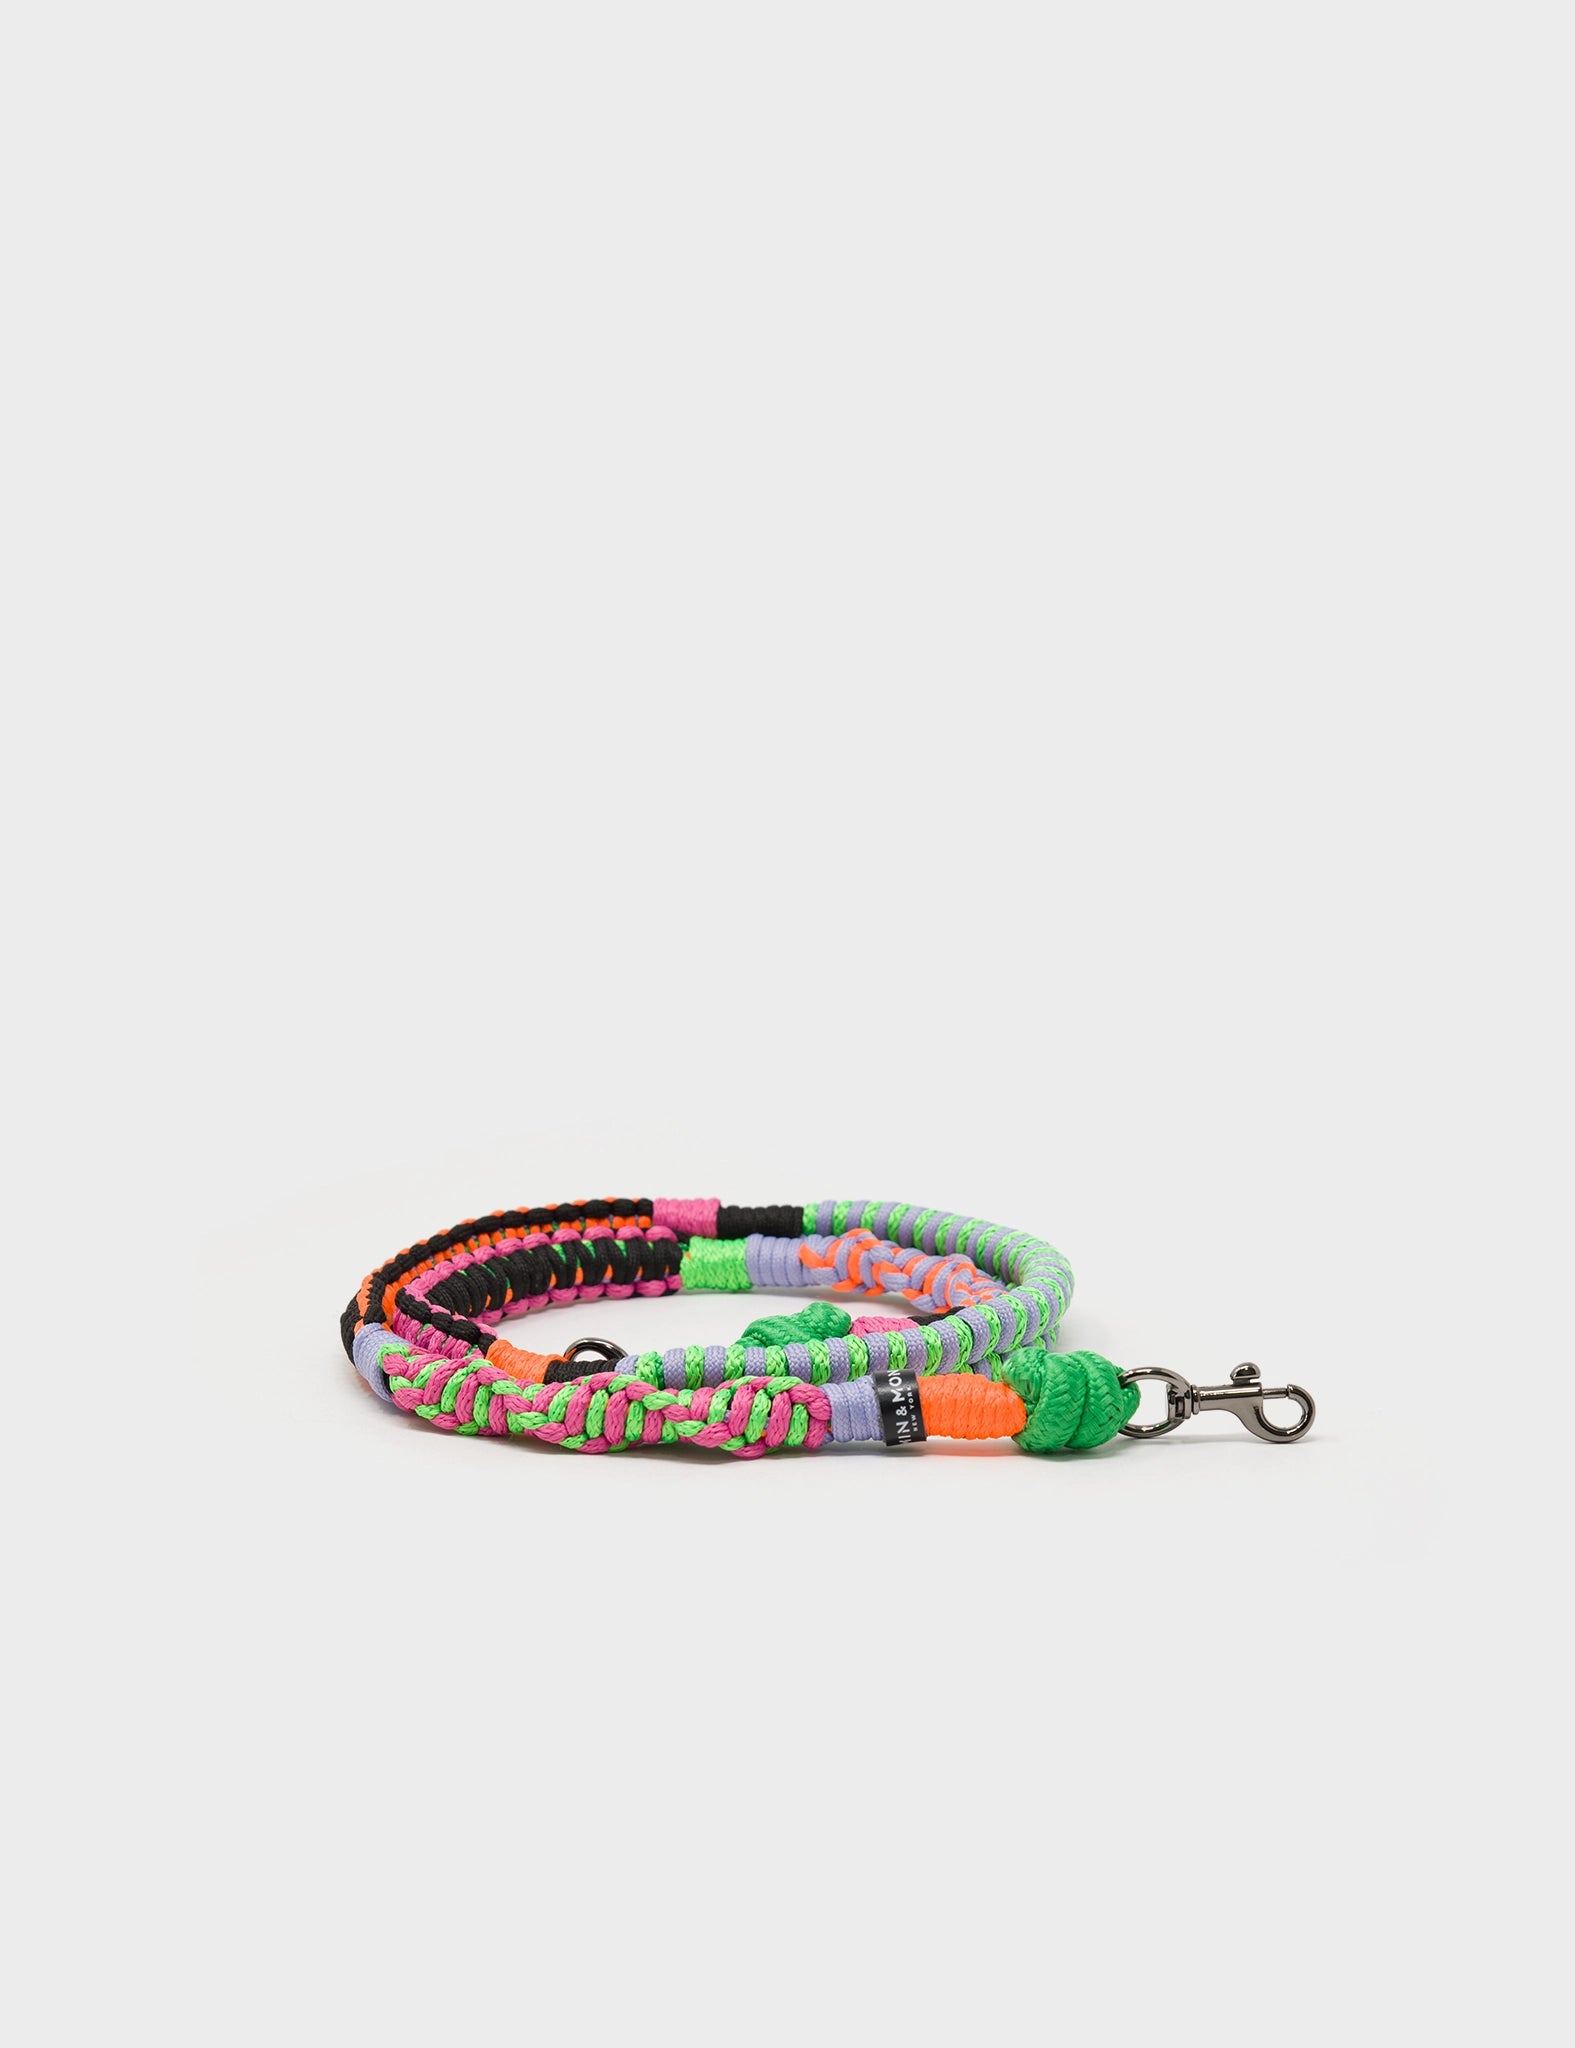 Colorful Rainbow Paracord Cord Rope Type III 7 Palestine